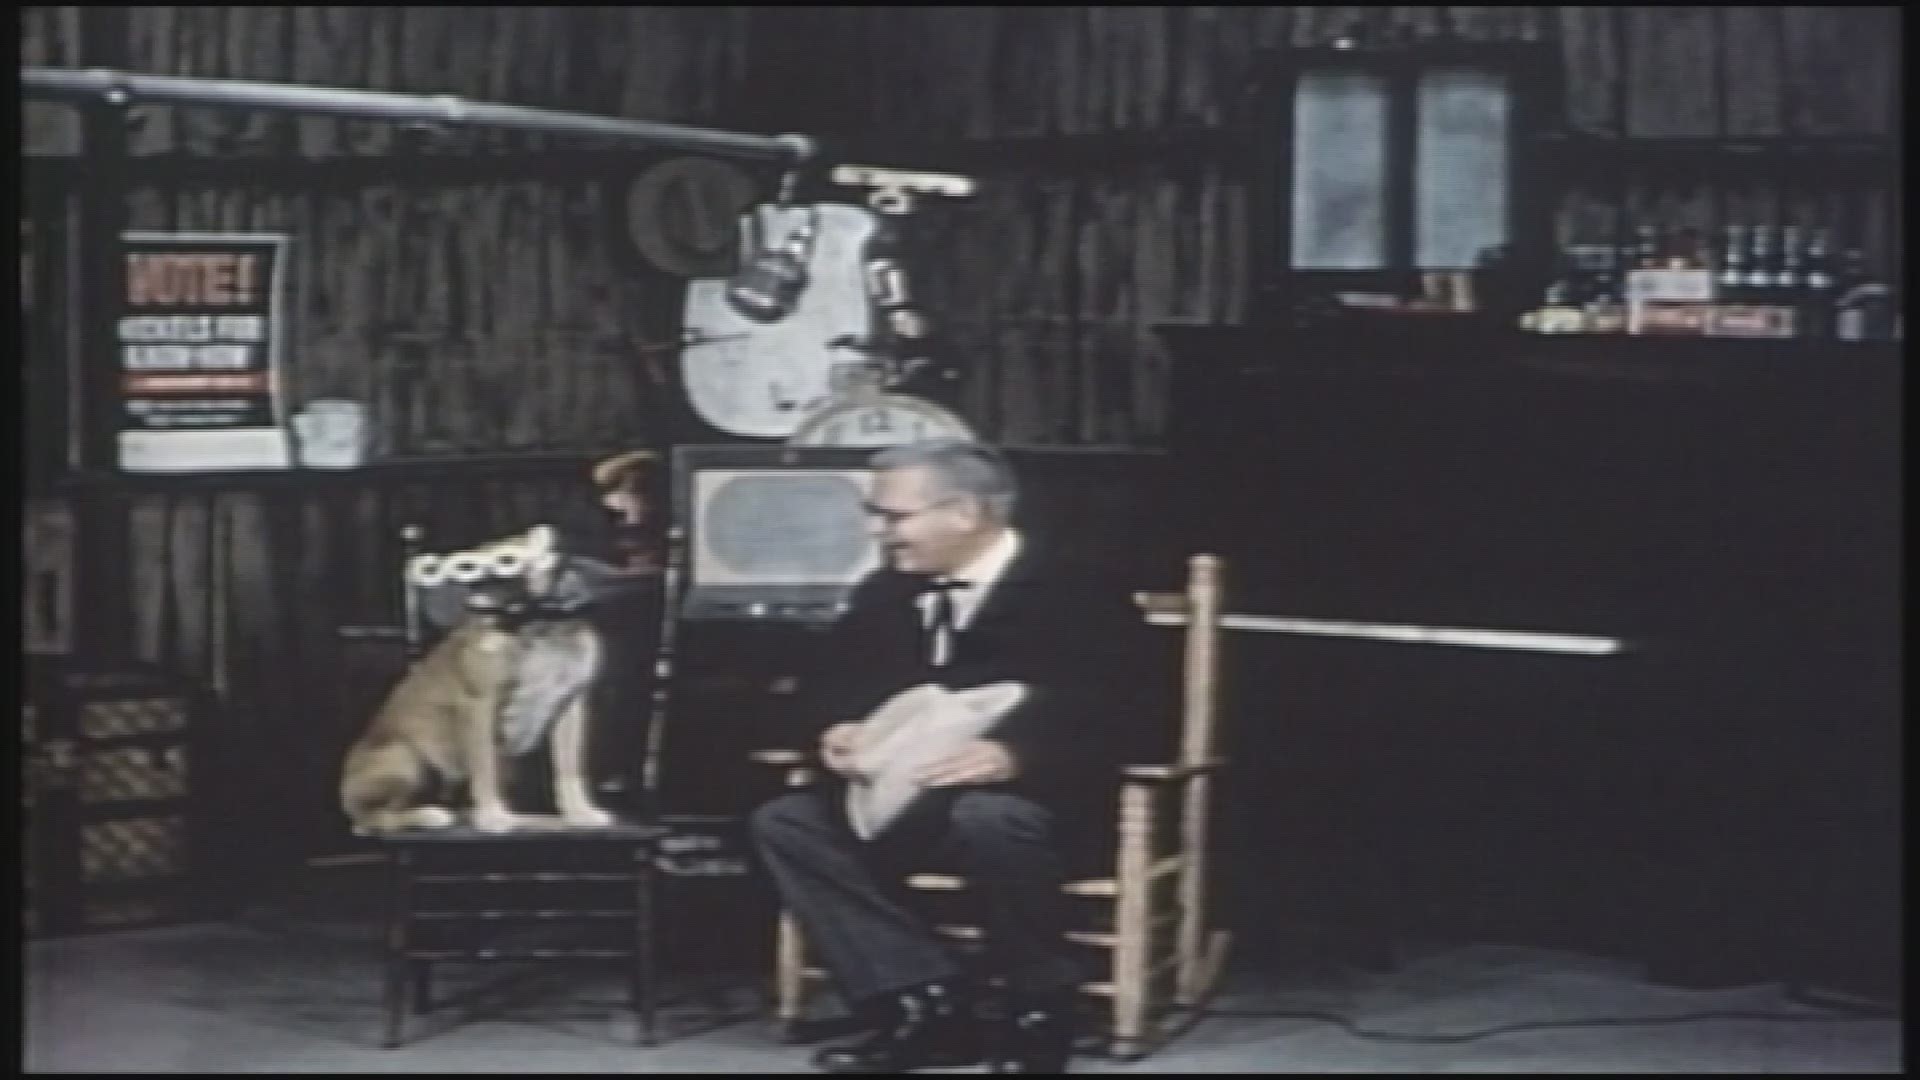 WFMY News 2 is celebrating 70 years and we’re going back in time! A huge part of WFMY News 2’s history is a show favorite, “The Old Rebel Show.” It starred, George Perry, the Rebel, Jim Tucker, Pecos Pete, Lee Marshal, the clown, Uncle Roy Griffin, and Jim Wiglesworth, puppeteer. Late and former WFMY News 2 Anchor, Lee Kinard talks about the show’s start during the station’s 40th anniversary special. Join the conversation on Twitter using the #WFMY70 to share your own memories of WFMY News 2.